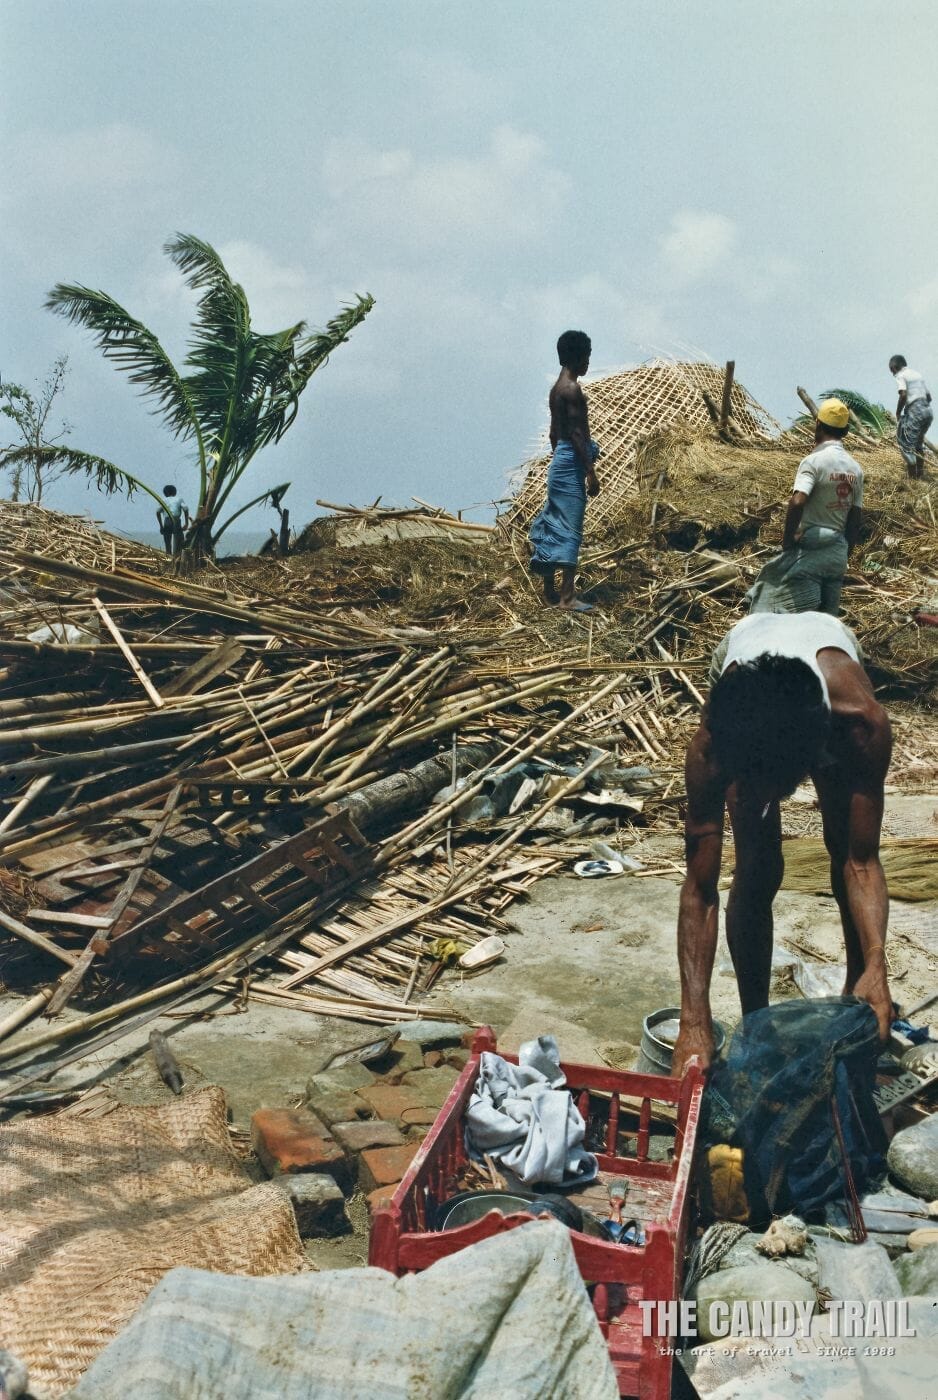 Salvaging belonging in Cox's Bazar, after a cyclone in Bangladesh 1991